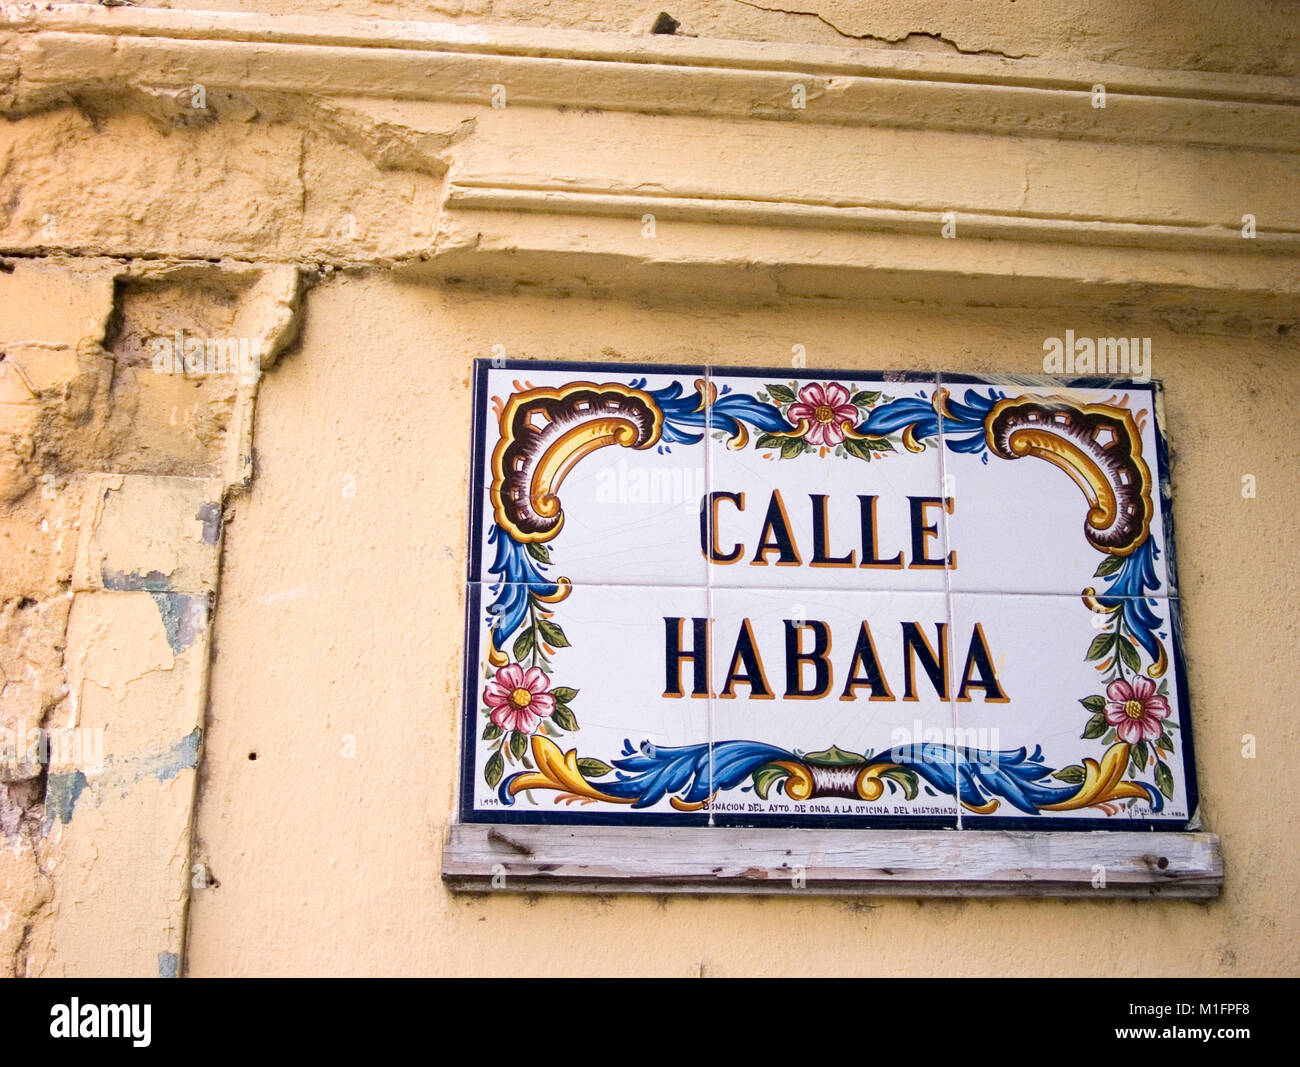 Mar 28, 2006 - Havana, CUBA - Old Havana Viejo street scene. Colorful tile 'Calle Habana' street sign. The Republic of Cuba is located in the northern Caribbean and south of the United States. The first European to visit Cuba was explorer Christopher Columbus in 1492. Centuries of colonial rule and revolutions followed. Batista was deposed by Fidel Castro and Che guevara in 1953. After the revolution trade with comminist Russia grew. The economy was hit hard in the 1990s following the collapse of the Soviet Union. Cuba currently trades with almost every nation in the world, albeit with restric Stock Photo